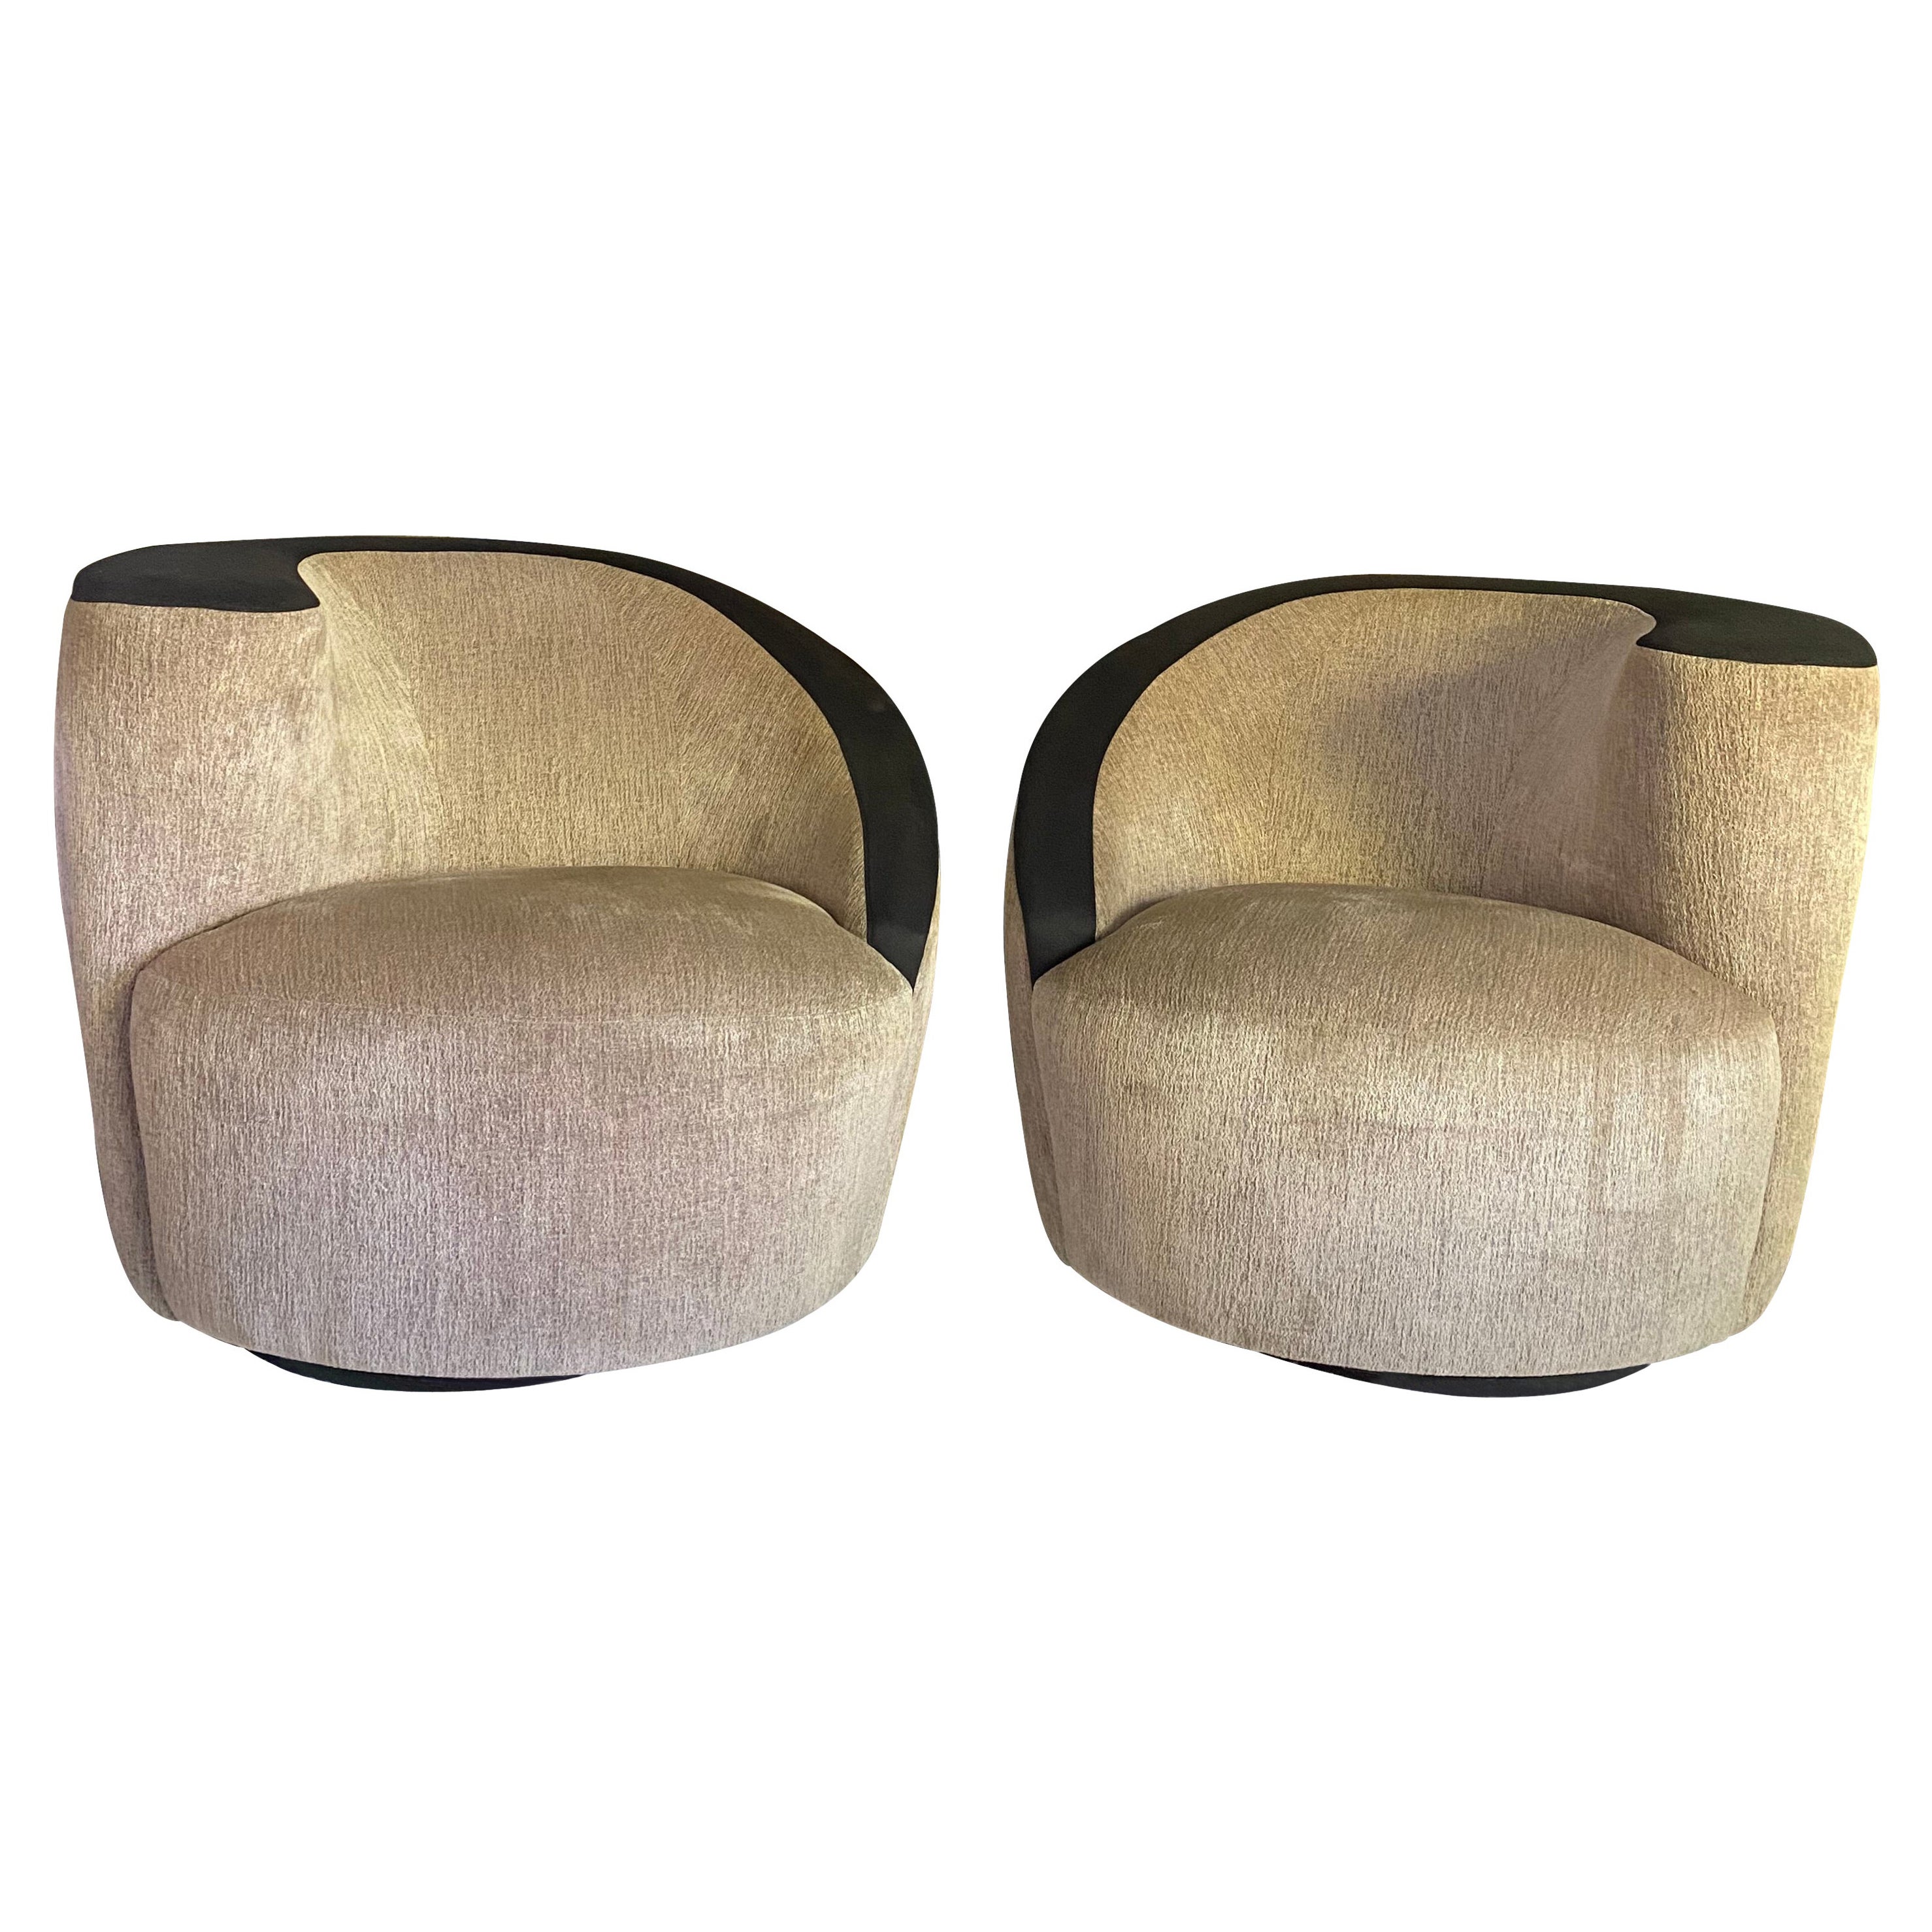 Weiman "Nautilus" Swivel Chairs, a Pair